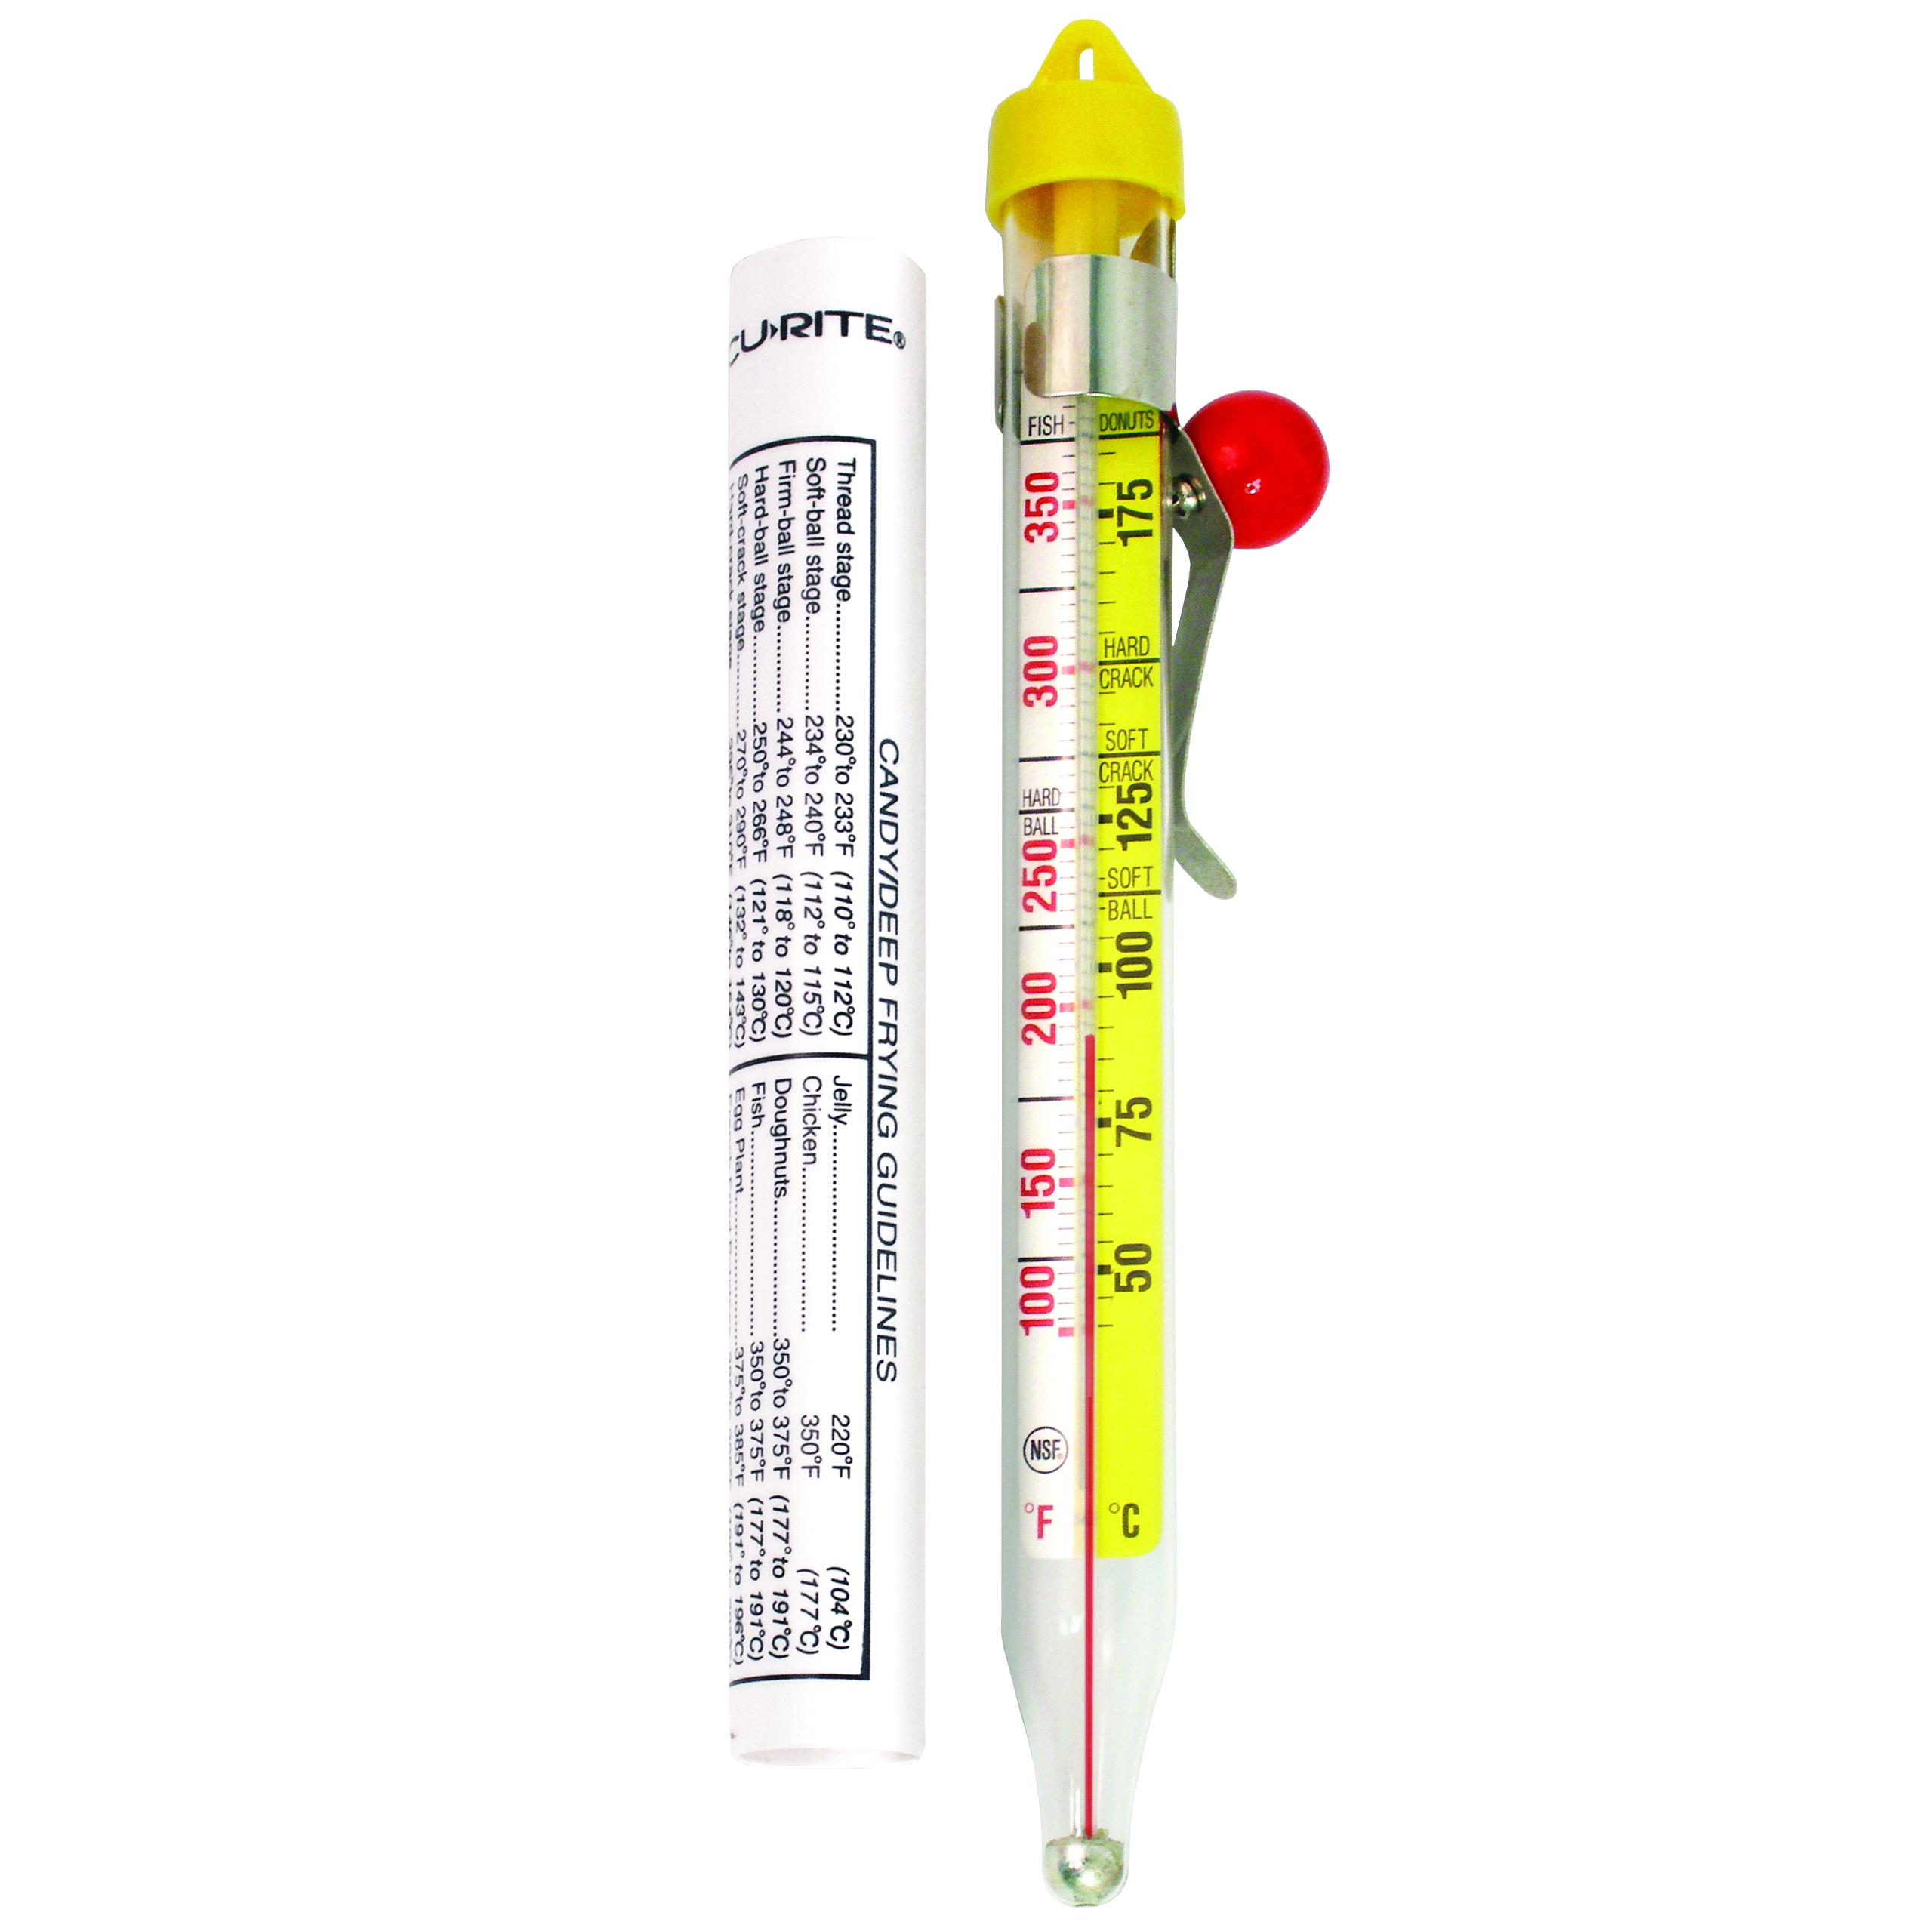 https://www.acurite.com/media/images/blog/00723-thermometer.jpg